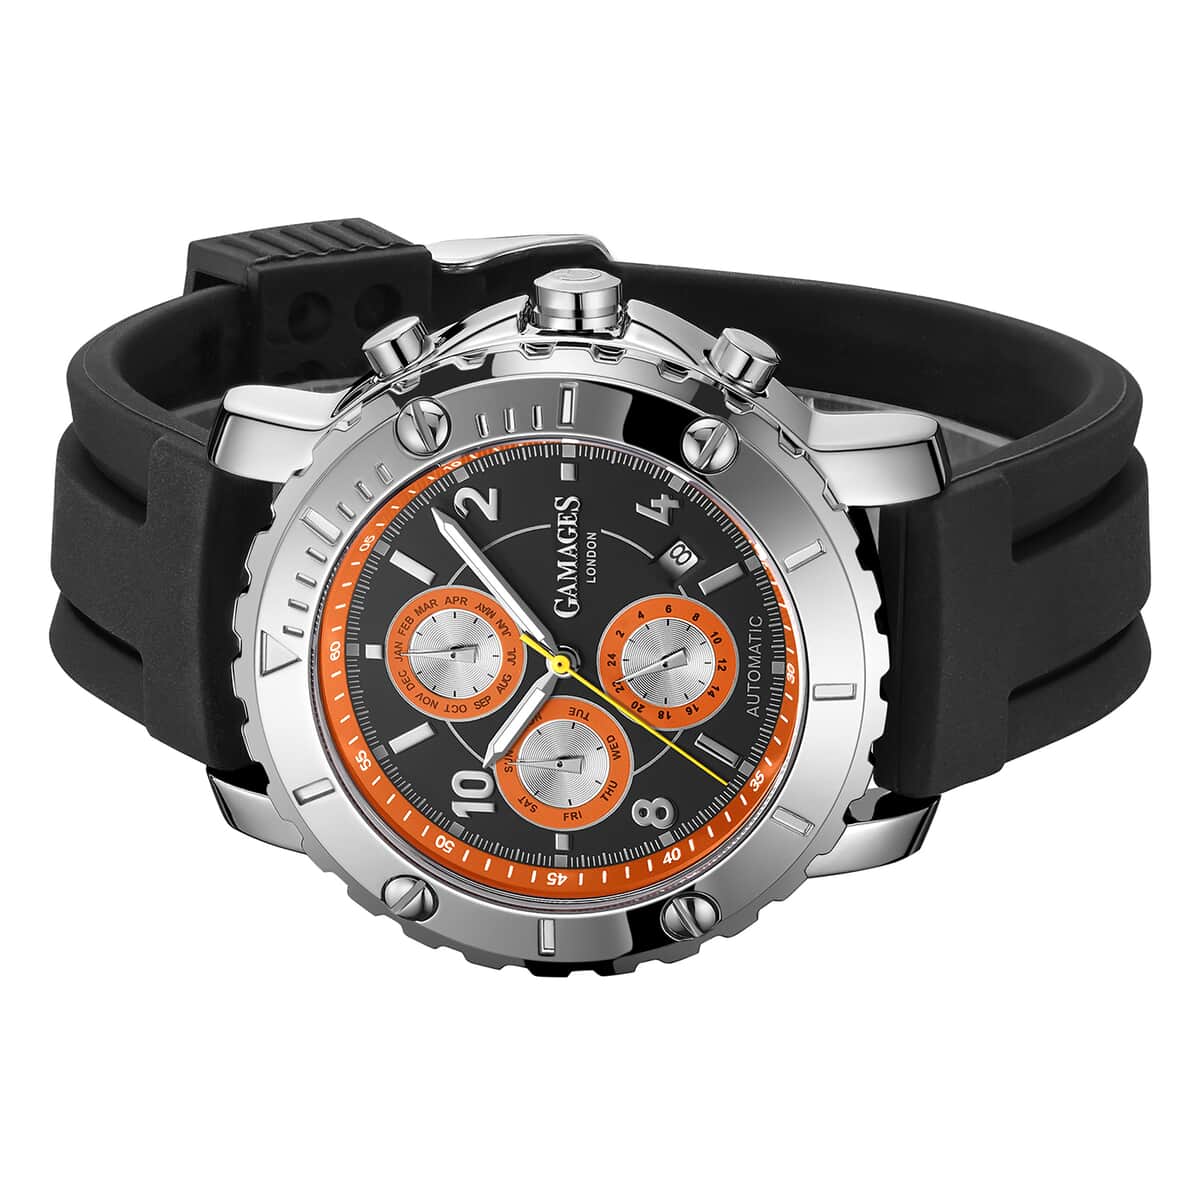 GAMAGES OF LONDON Limited Edition Hand Assembled Innovator Automatic Movement Silicone Strap Watch in Orange (45mm) FREE GIFT PEN image number 1